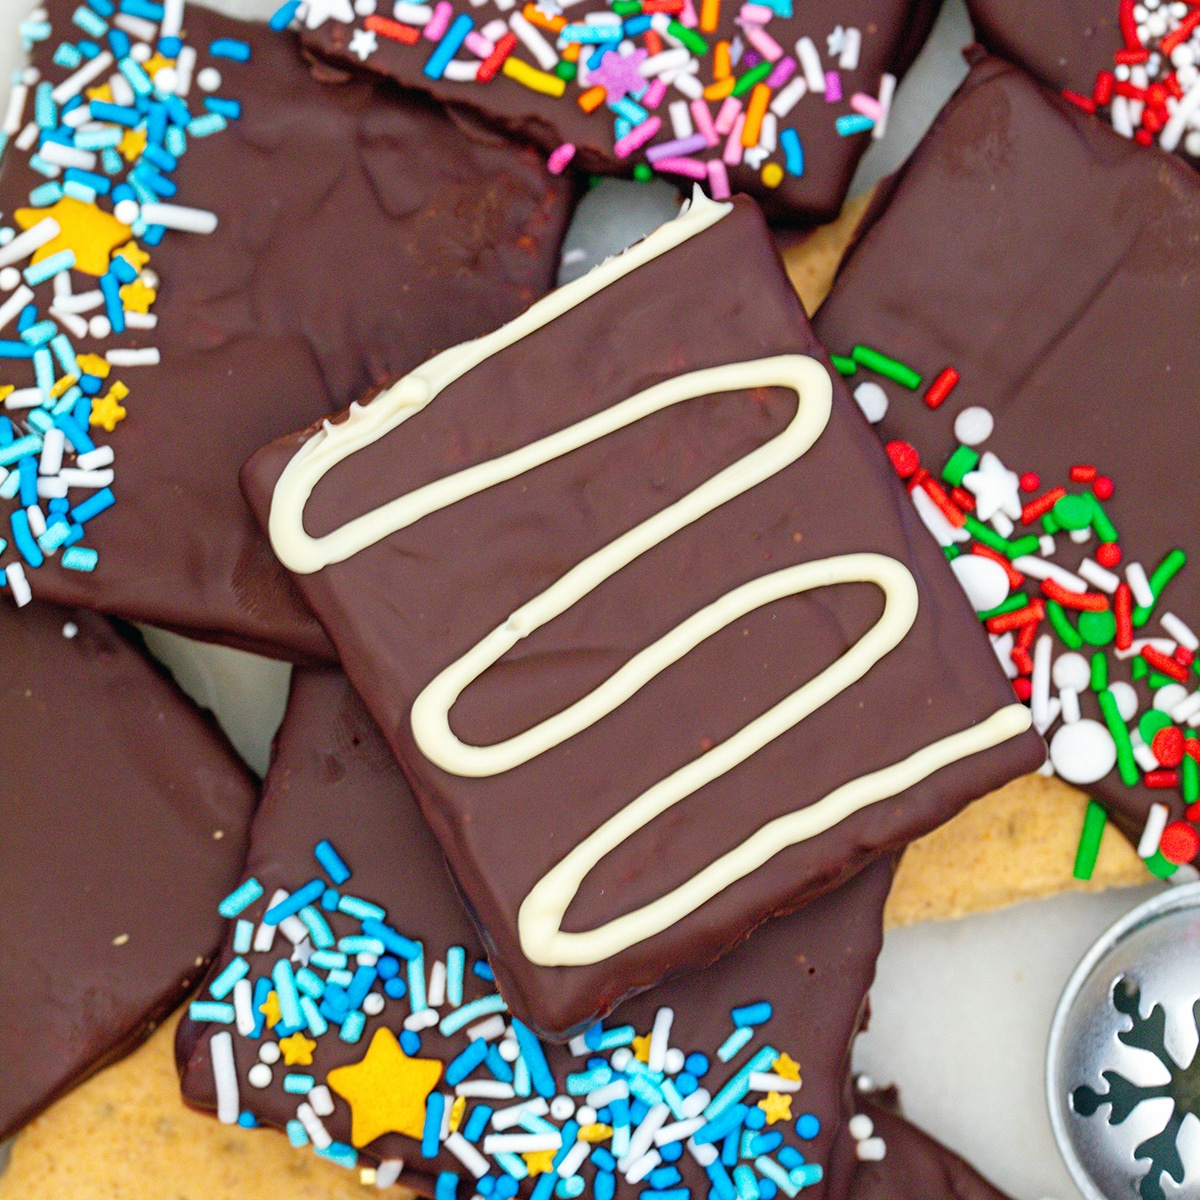 Closeup view of chocolate covered graham crackers with sprinkles and white chocolate.